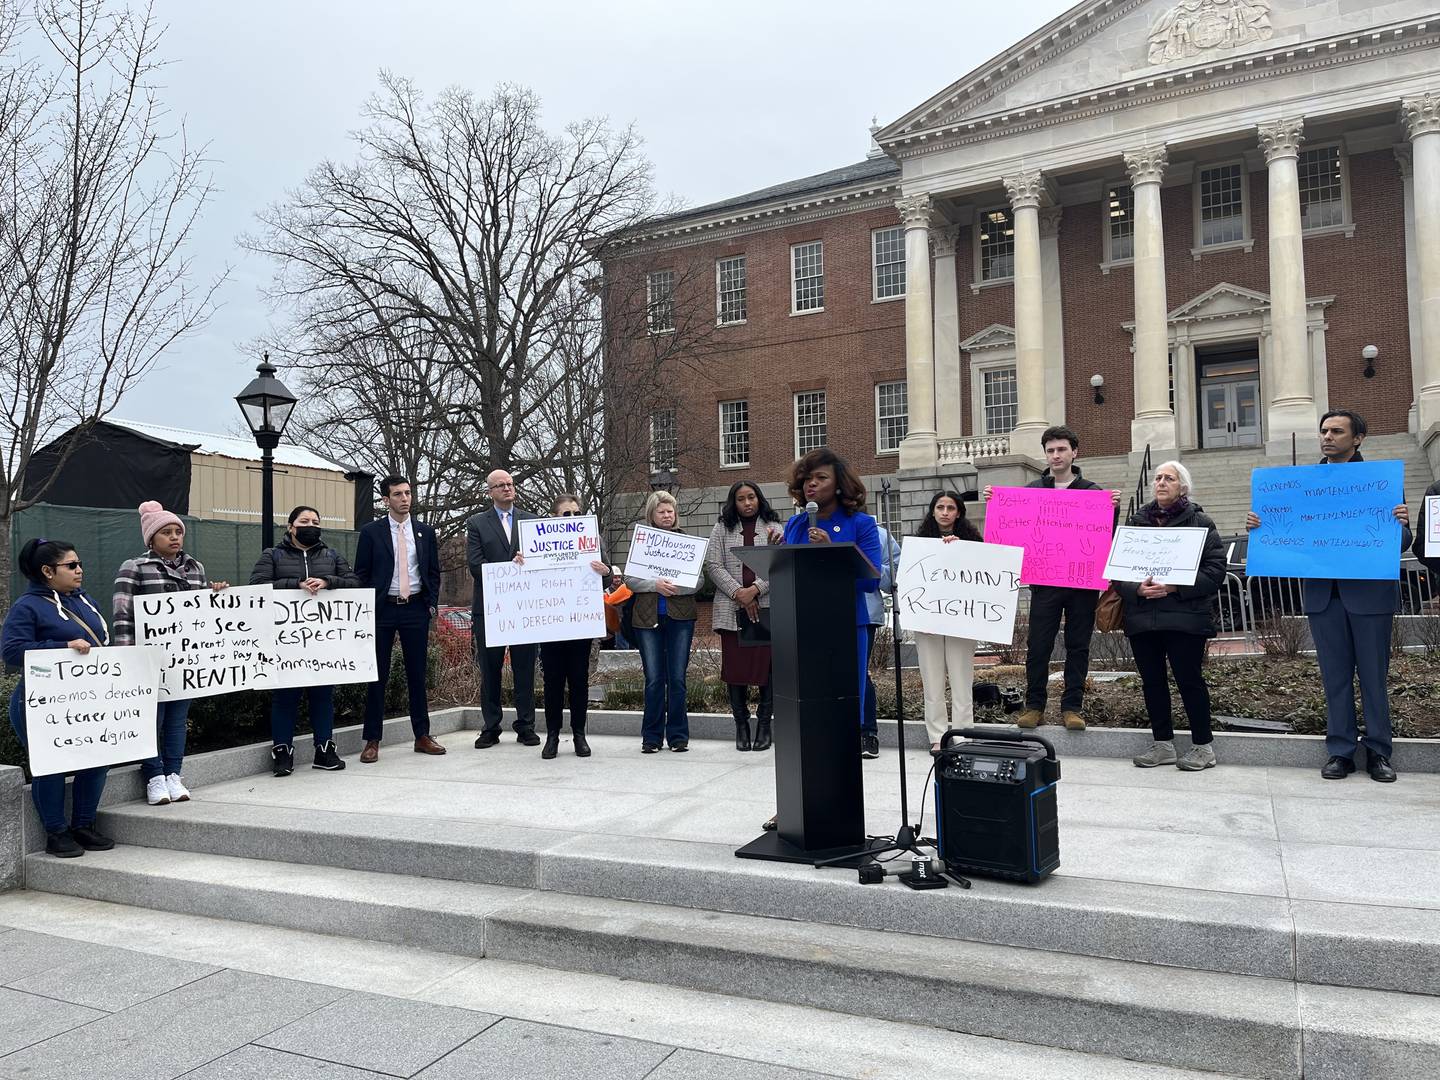 Tenants, advocates, and lawmakers gathered outside the State House Thursday to call on lawmakers to pass several policies that would protect tenants from eviction or poor living conditions